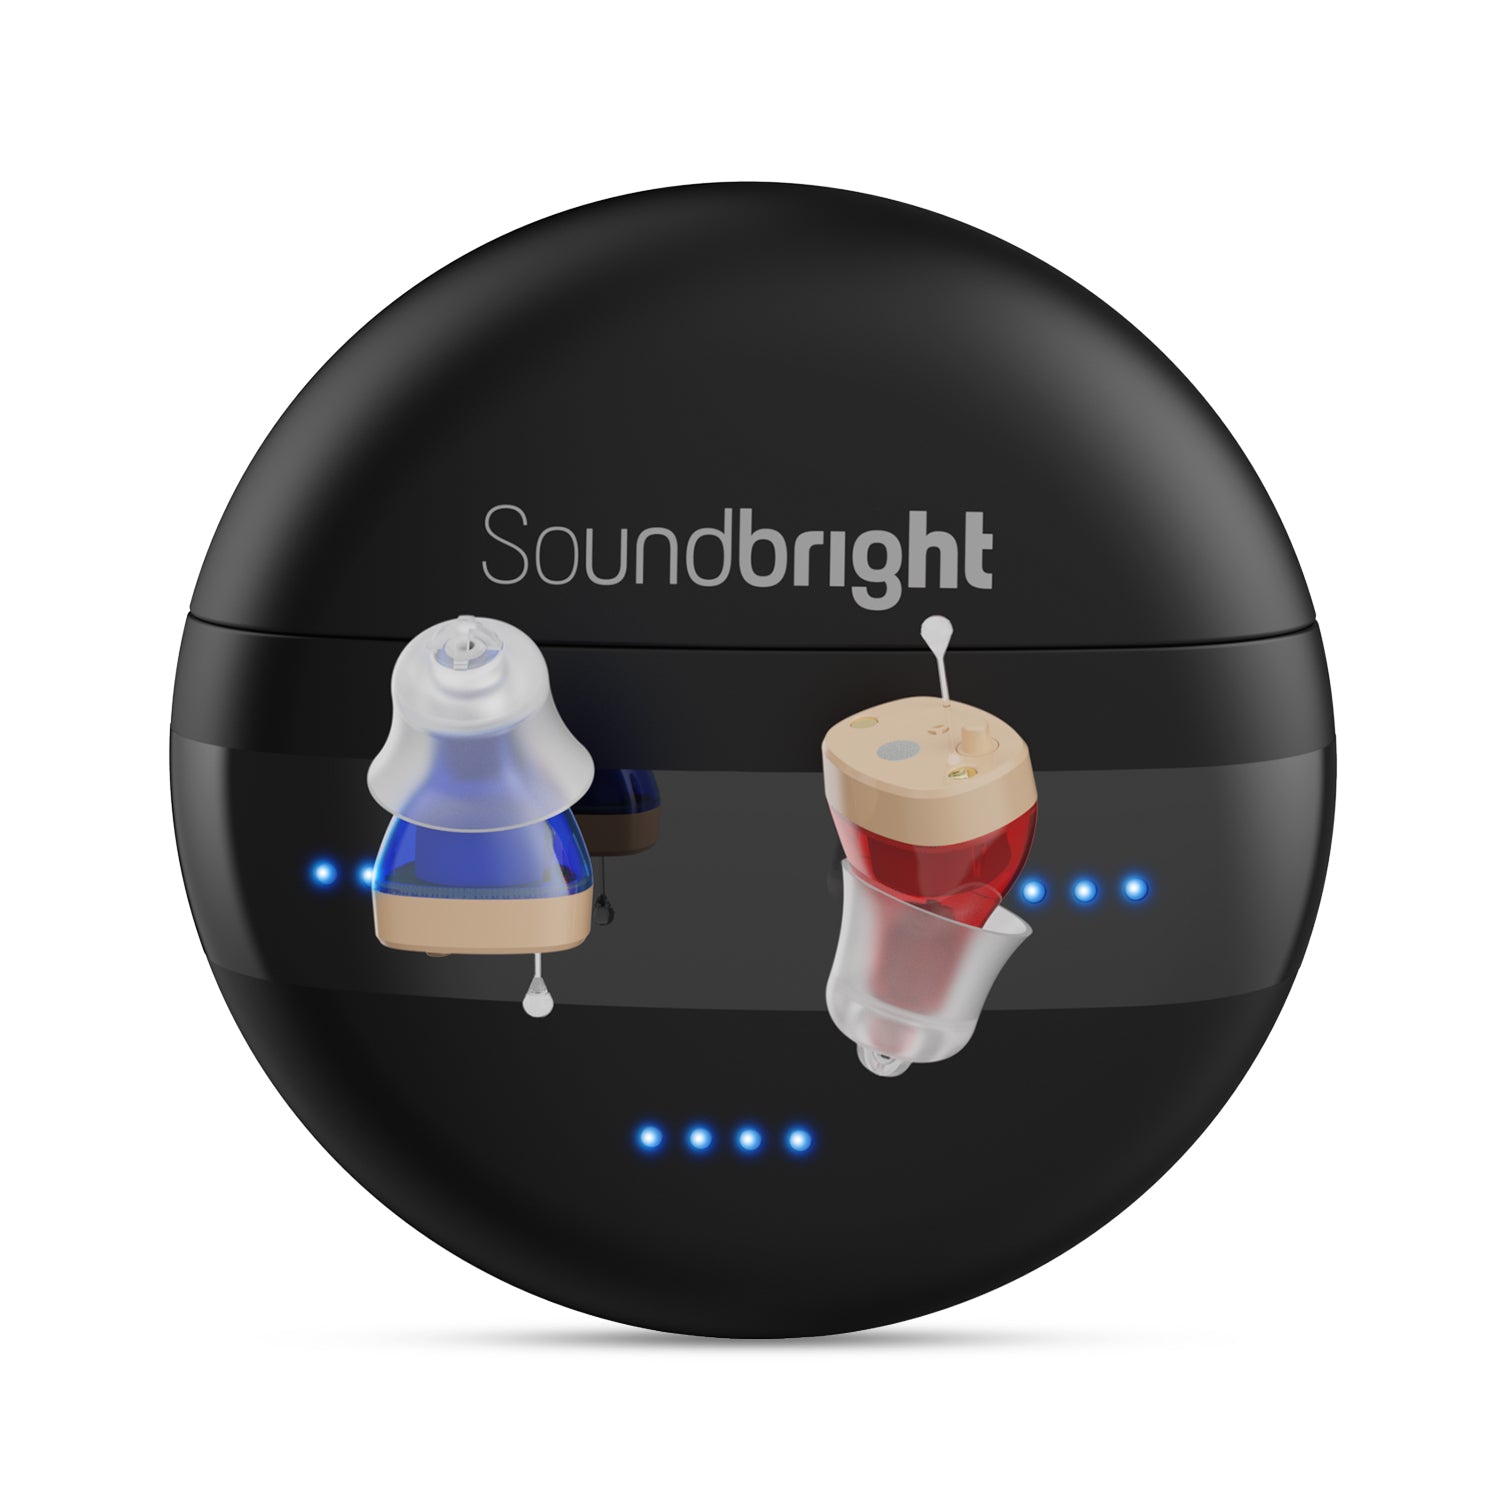 Soundbright Mini in-the-ear hearing aids closed charging case with both hearing aids displayed